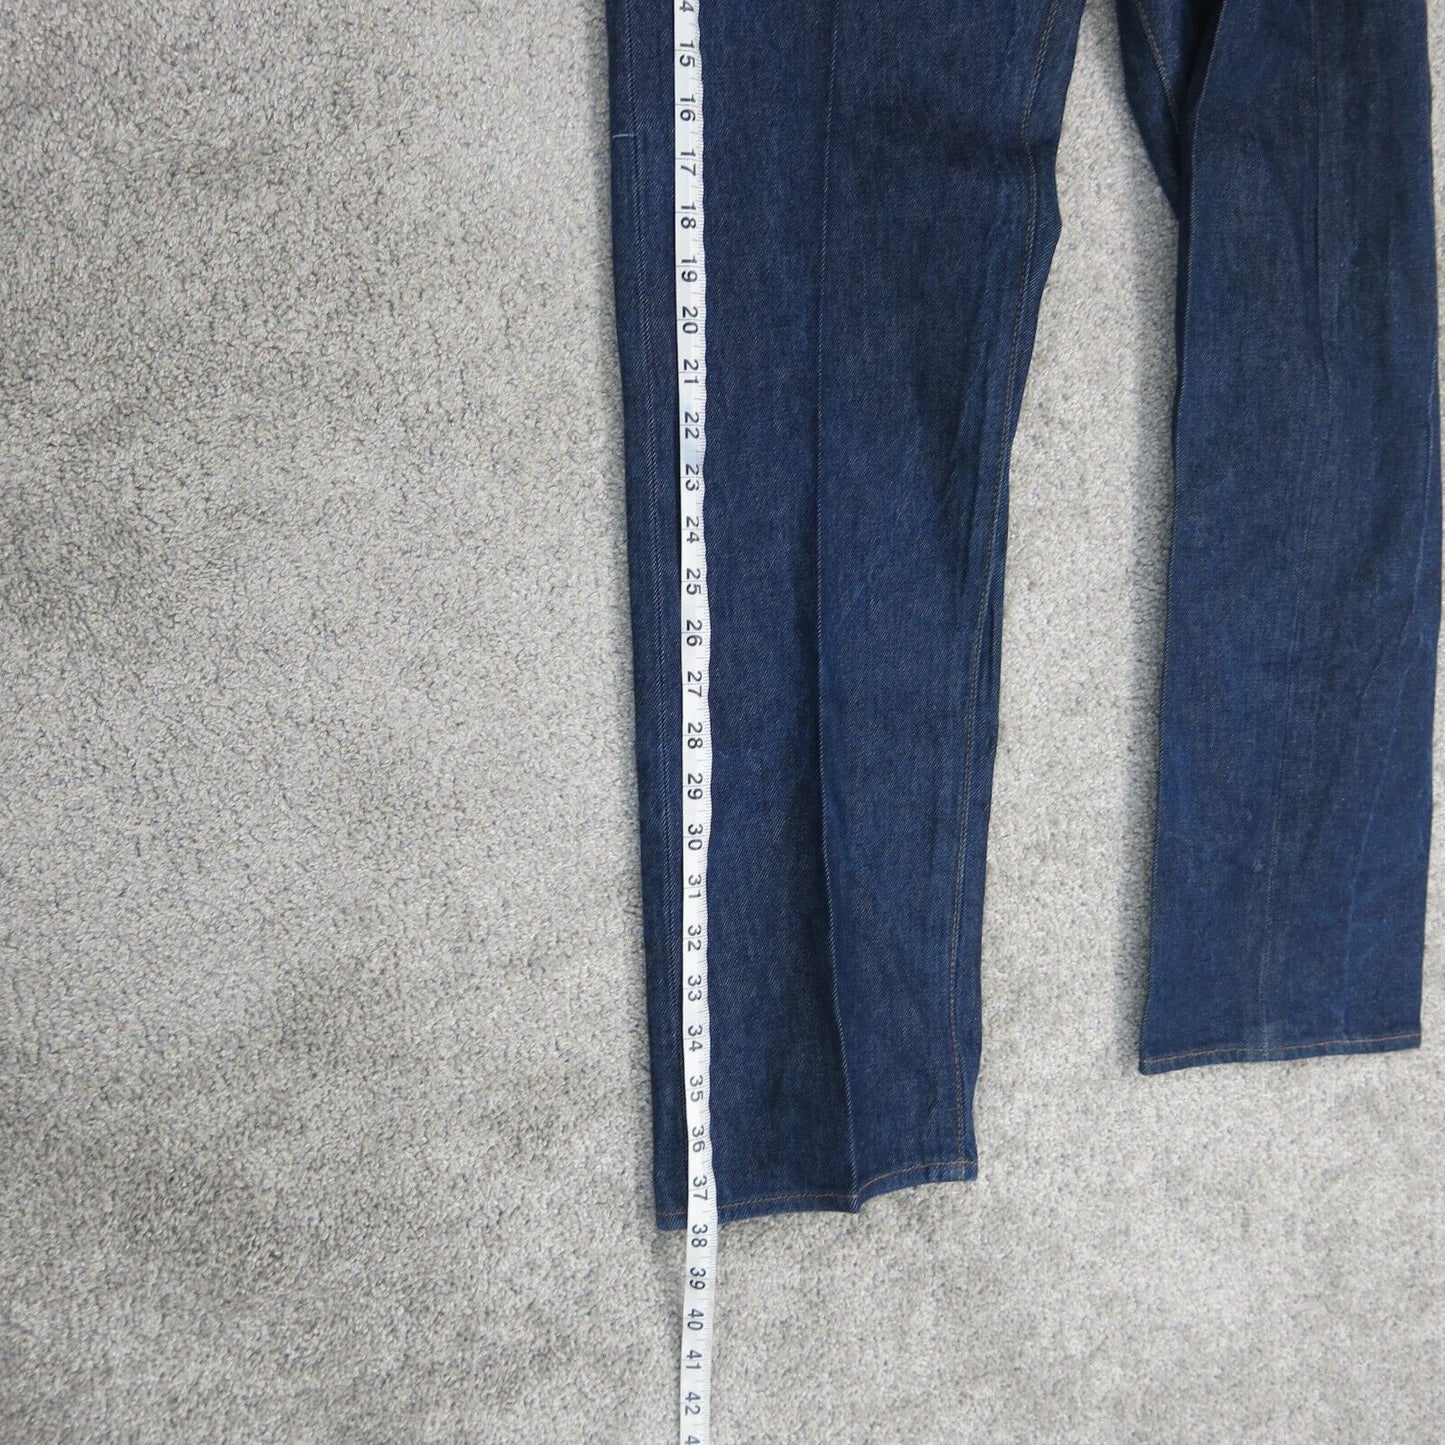 Levi Strauss & Co Water Less Mens Straight Leg Jeans High Rise Blue Size W34XL32